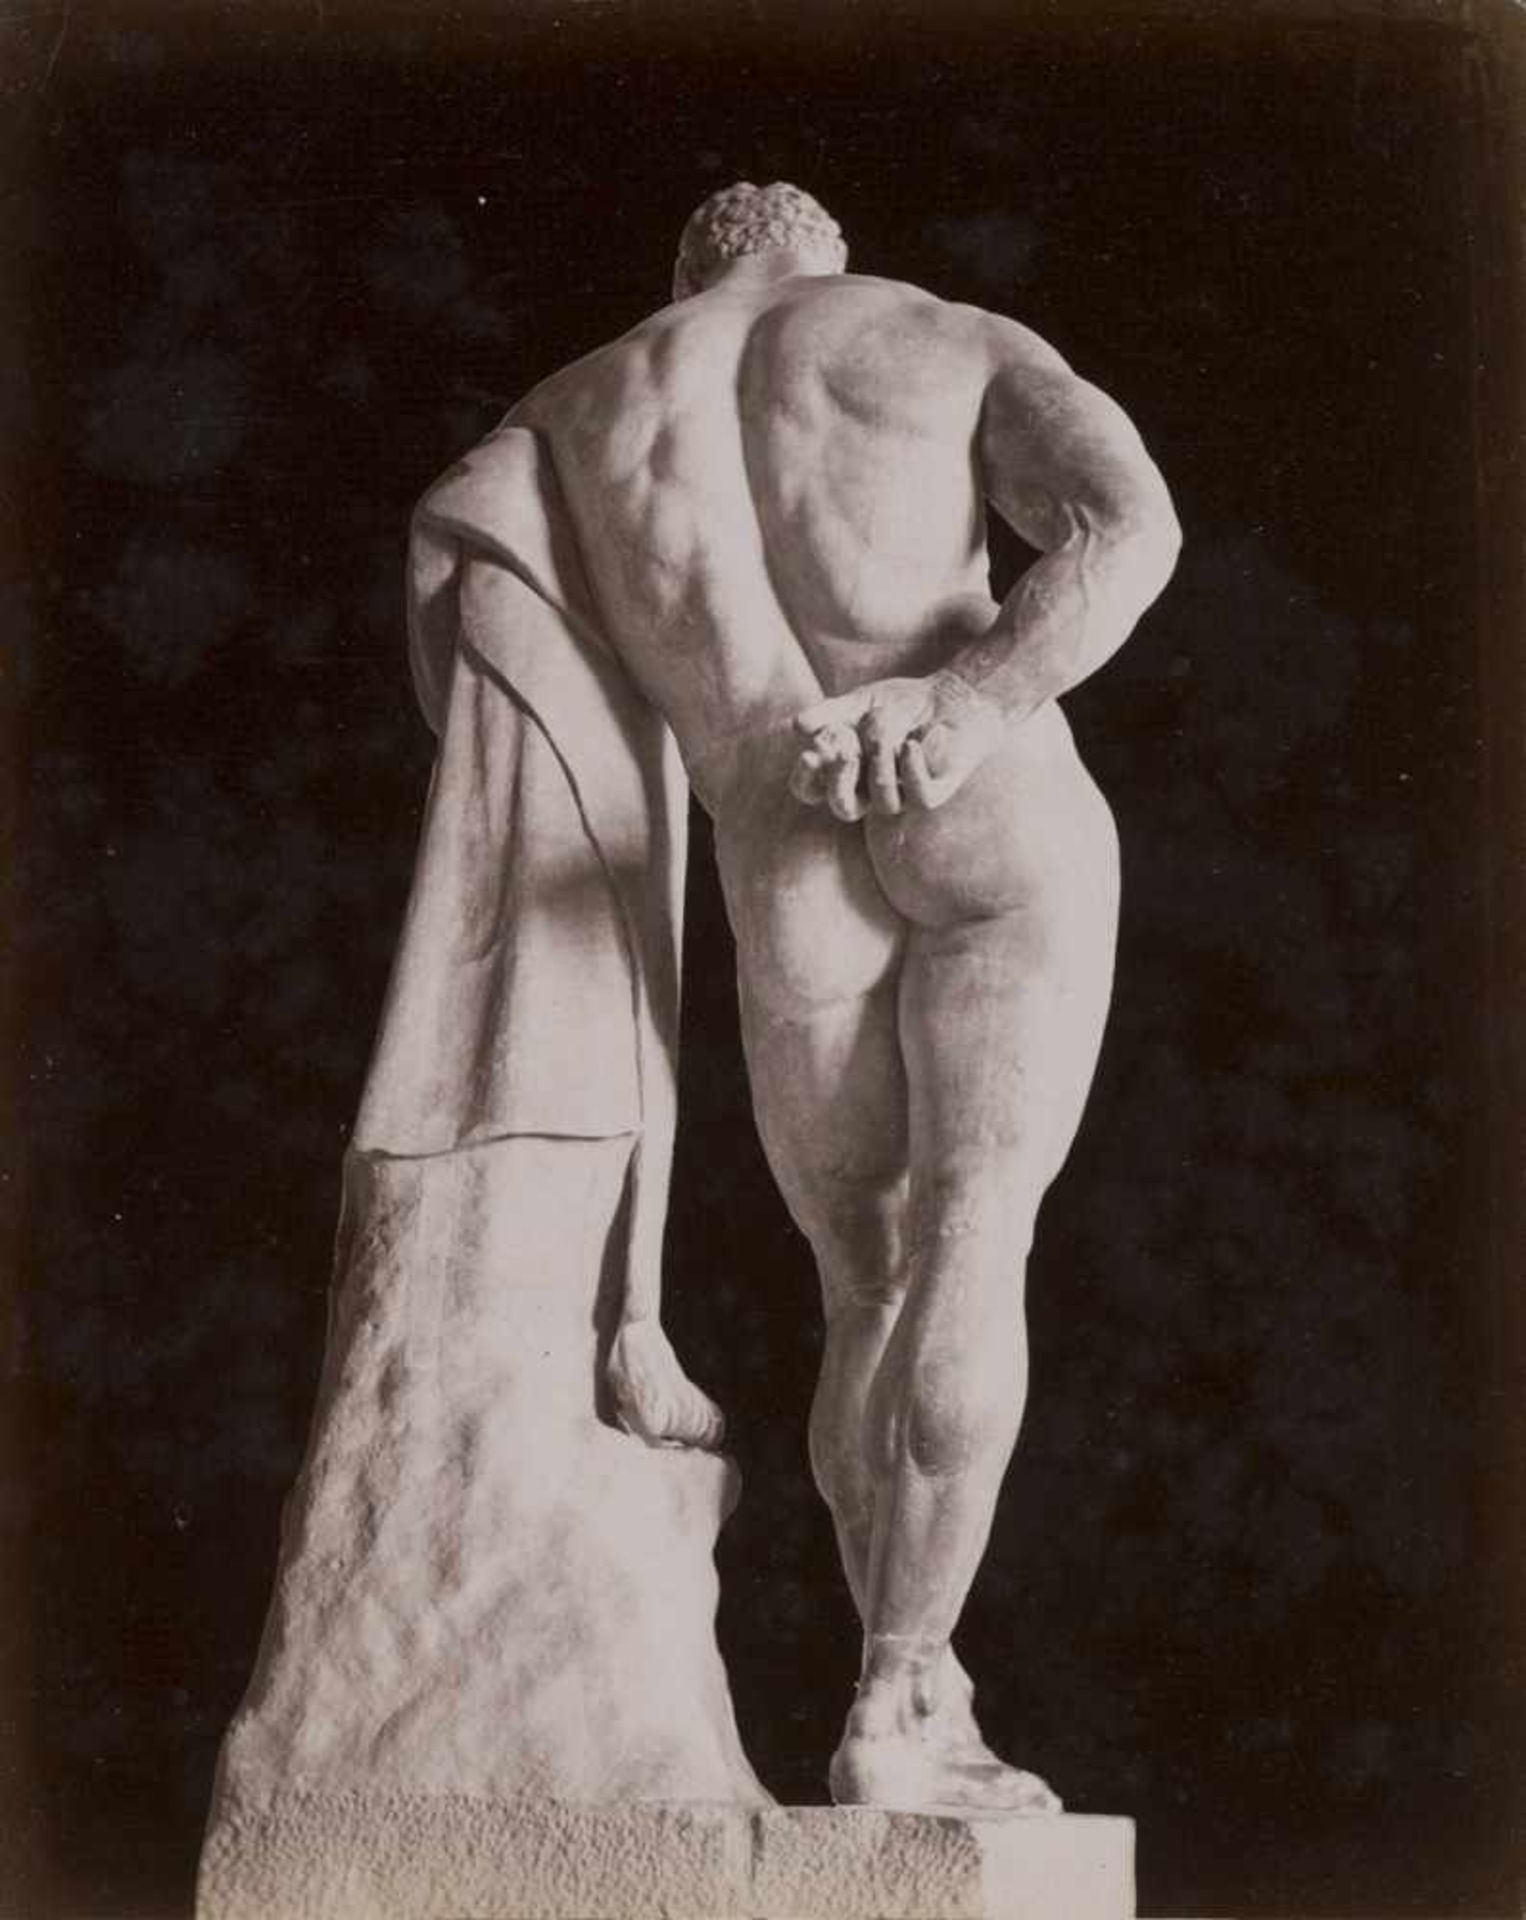 Italy: Art reproductions of sculptures and views of Italy Photographers: Giorgio Sommer, J. Kuhn,